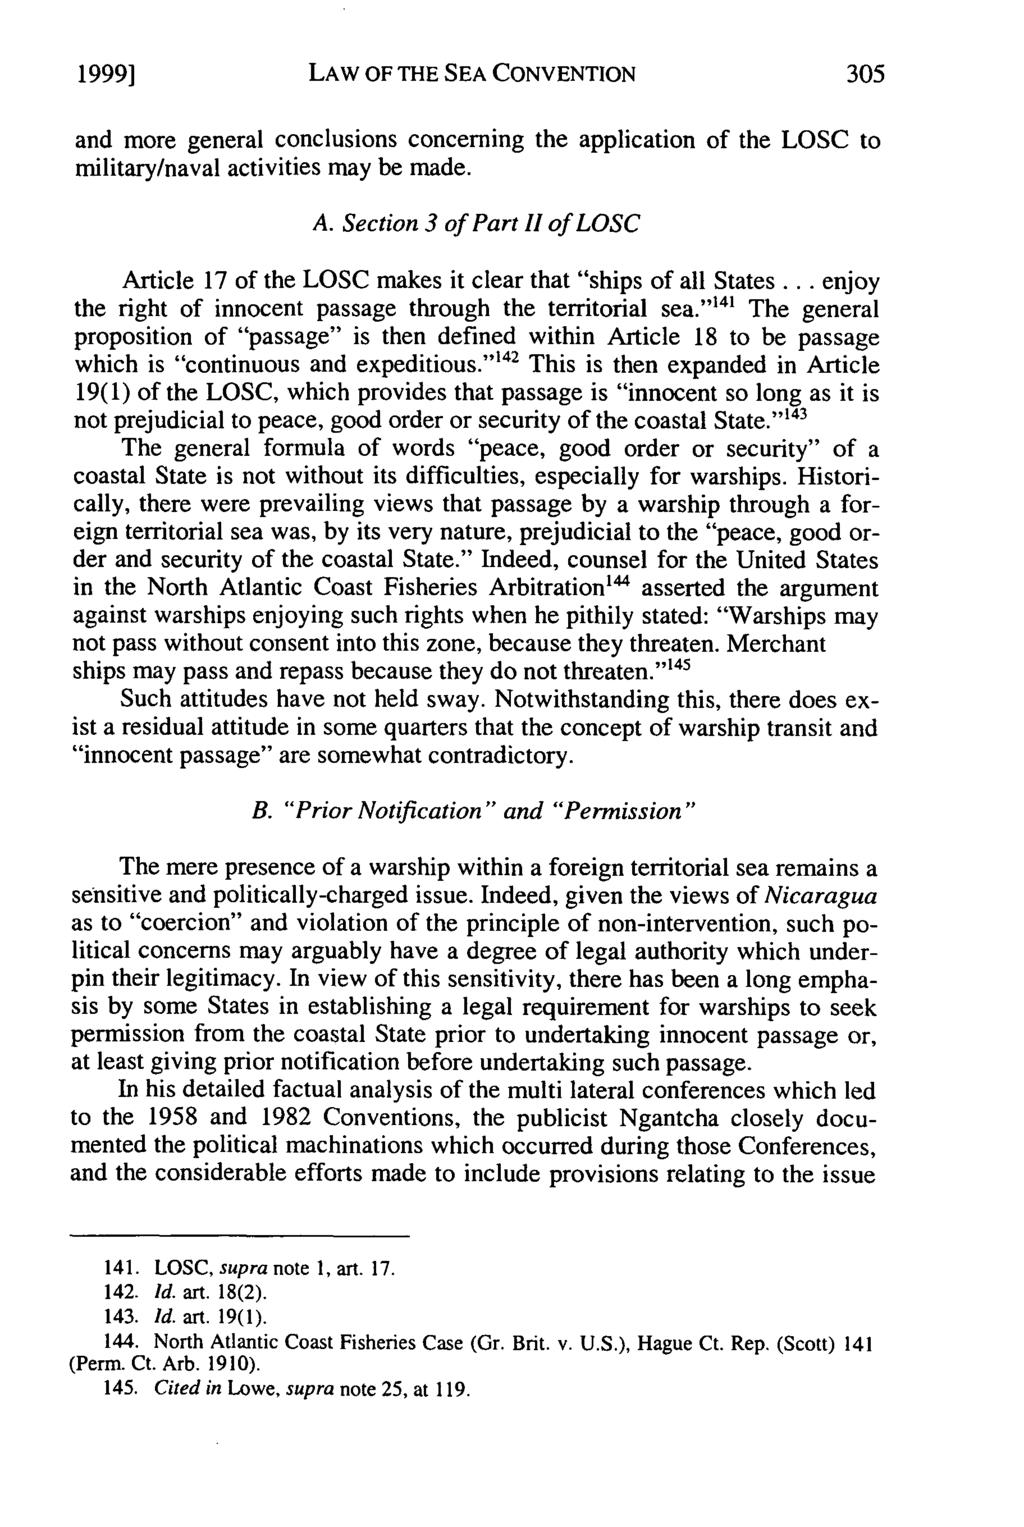 1999] Stephens: The Impact of the 1982 Law of the Sea Convention on the Conduct o LAW OF THE SEA CONVENTION and more general conclusions concerning the application of the LOSC to military/naval